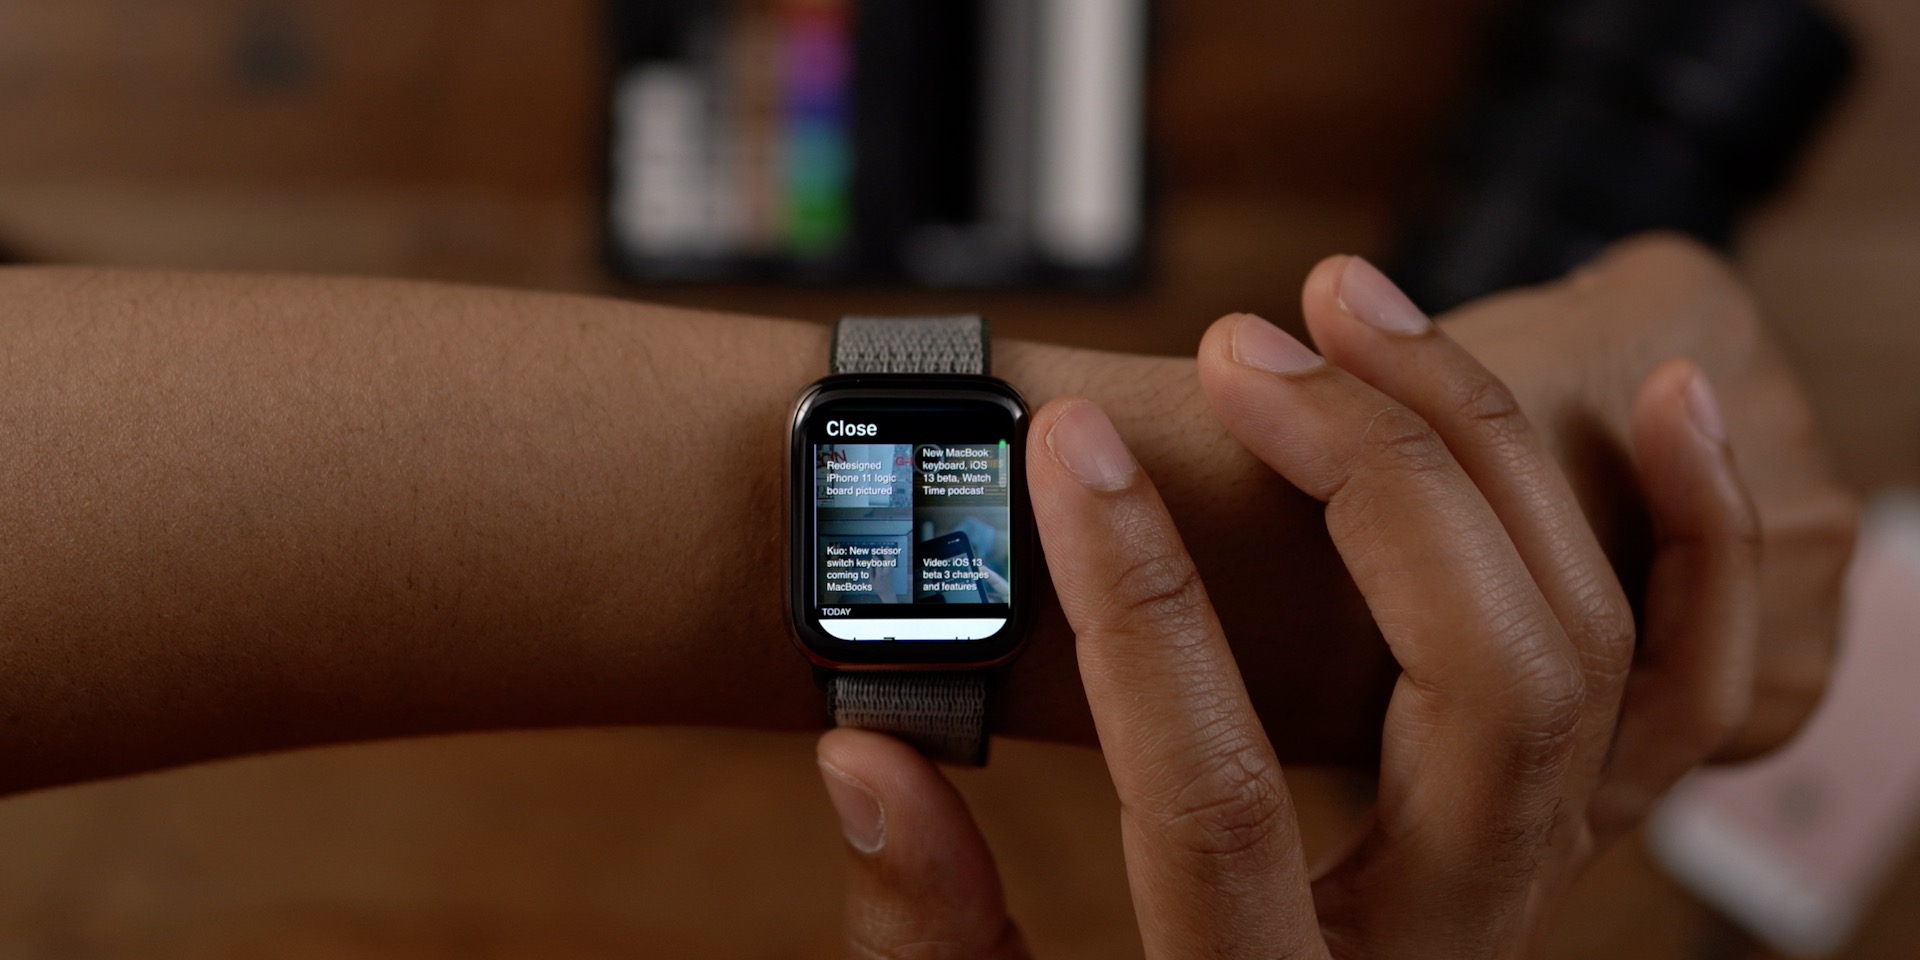 Browse websites from watchOS 6 using Siri